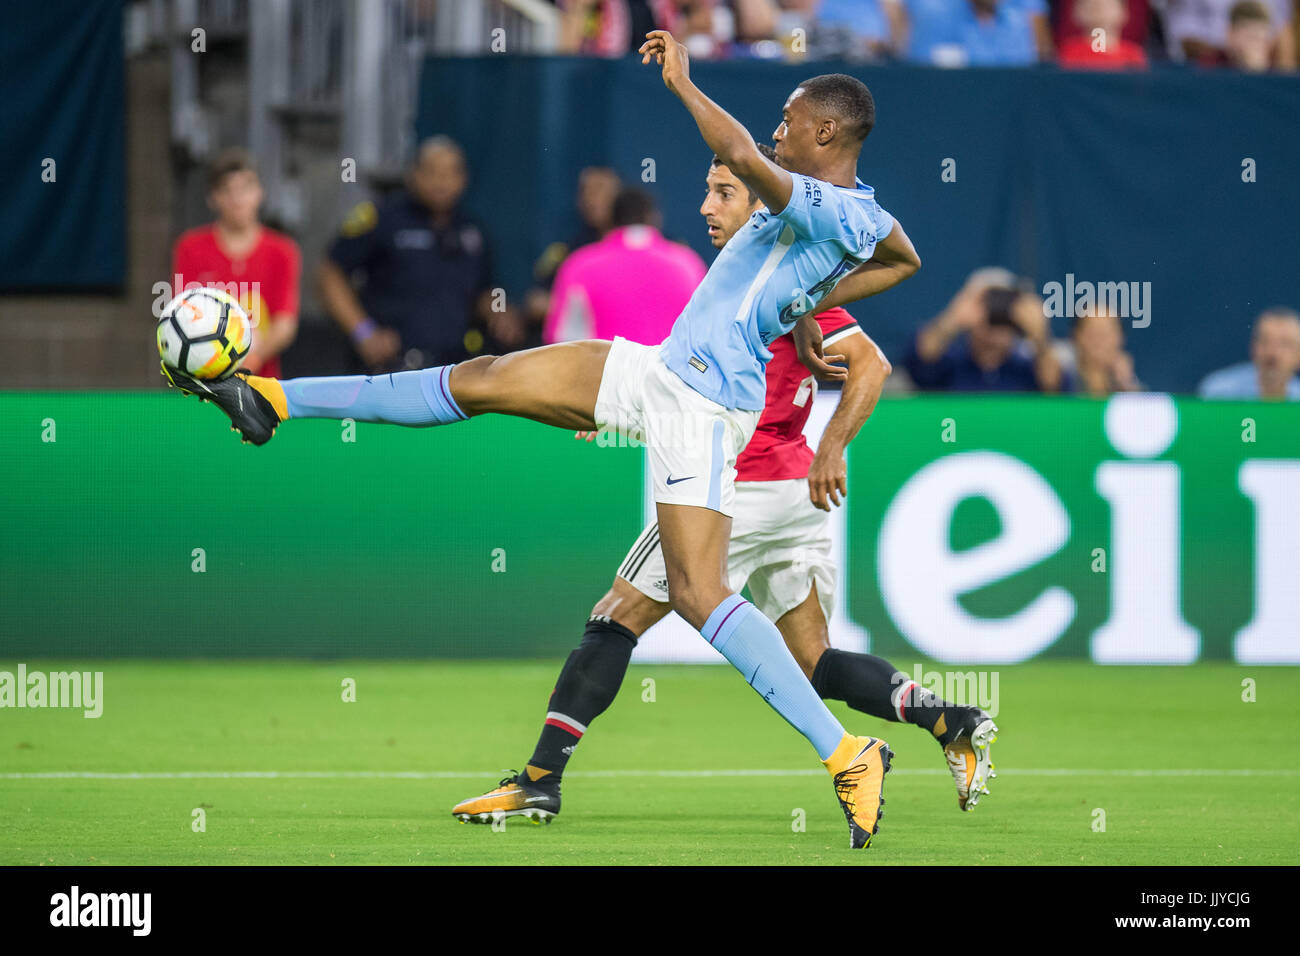 Houston, TX, USA. 20th July, 2017. Manchester City defender John Stones (5) controls the ball in front of Manchester United midfielder Henrikh Mkhitaryan (22) during the 1st half of an International Champions Cup soccer match between Manchester United and Manchester City at NRG Stadium in Houston, TX. Trask Smith/CSM/Alamy Live News Stock Photo